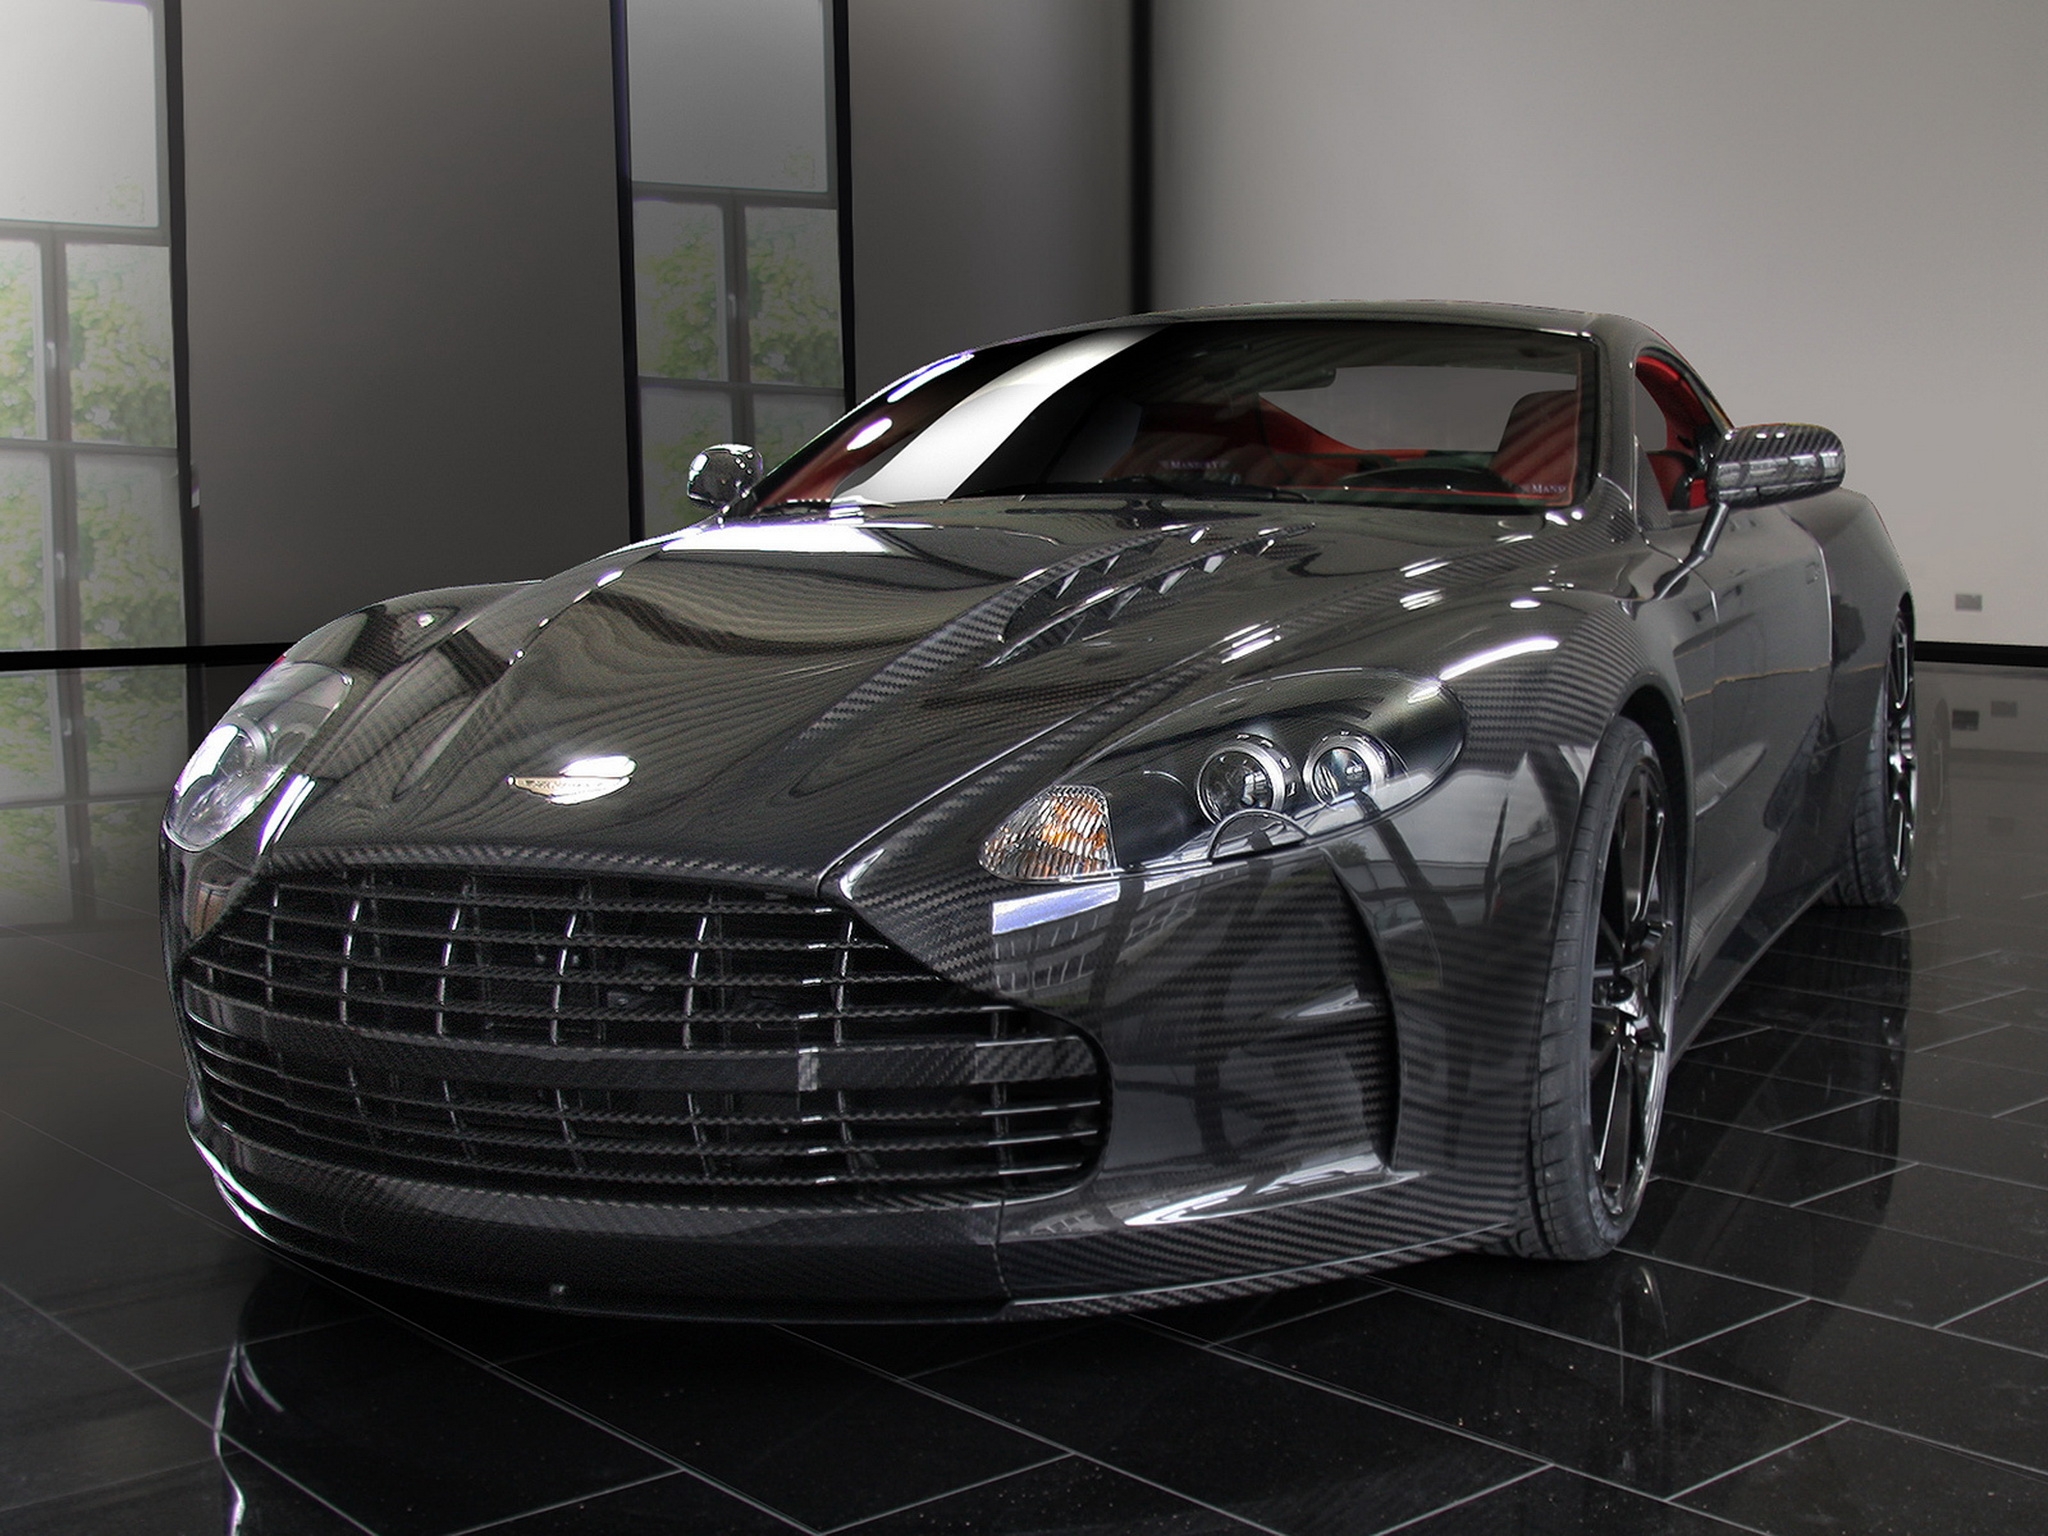 aston martin, cars, black, reflection, front view, style, dbs, 2009, mansory